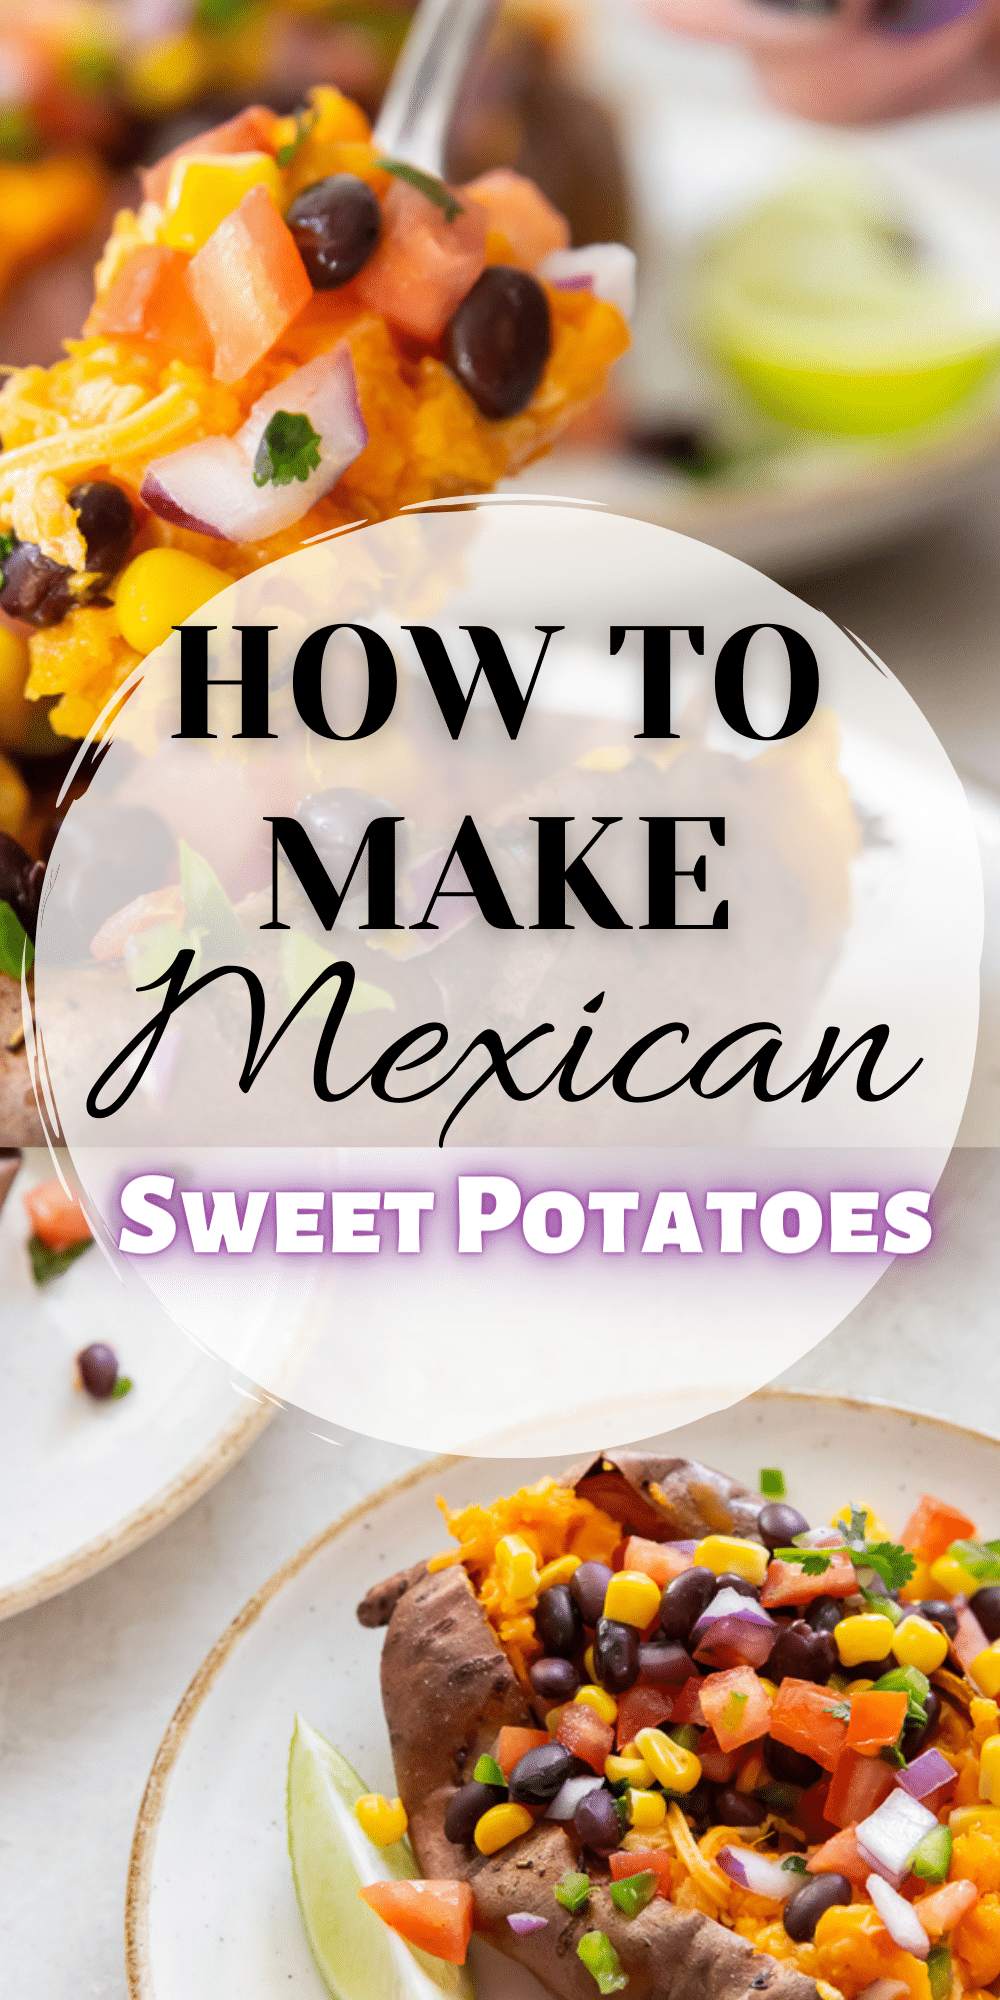 Tender, perfectly cooked Air Fryer Mexican Sweet Potatoes topped with fresh salsa are a vegan meal or side dish packed with fresh veggies and amazing flavors. This recipe is super simple, delightfully fresh, and great for meal prep too. #sweetpotatoes #freshsalsa via @vegetarianmamma